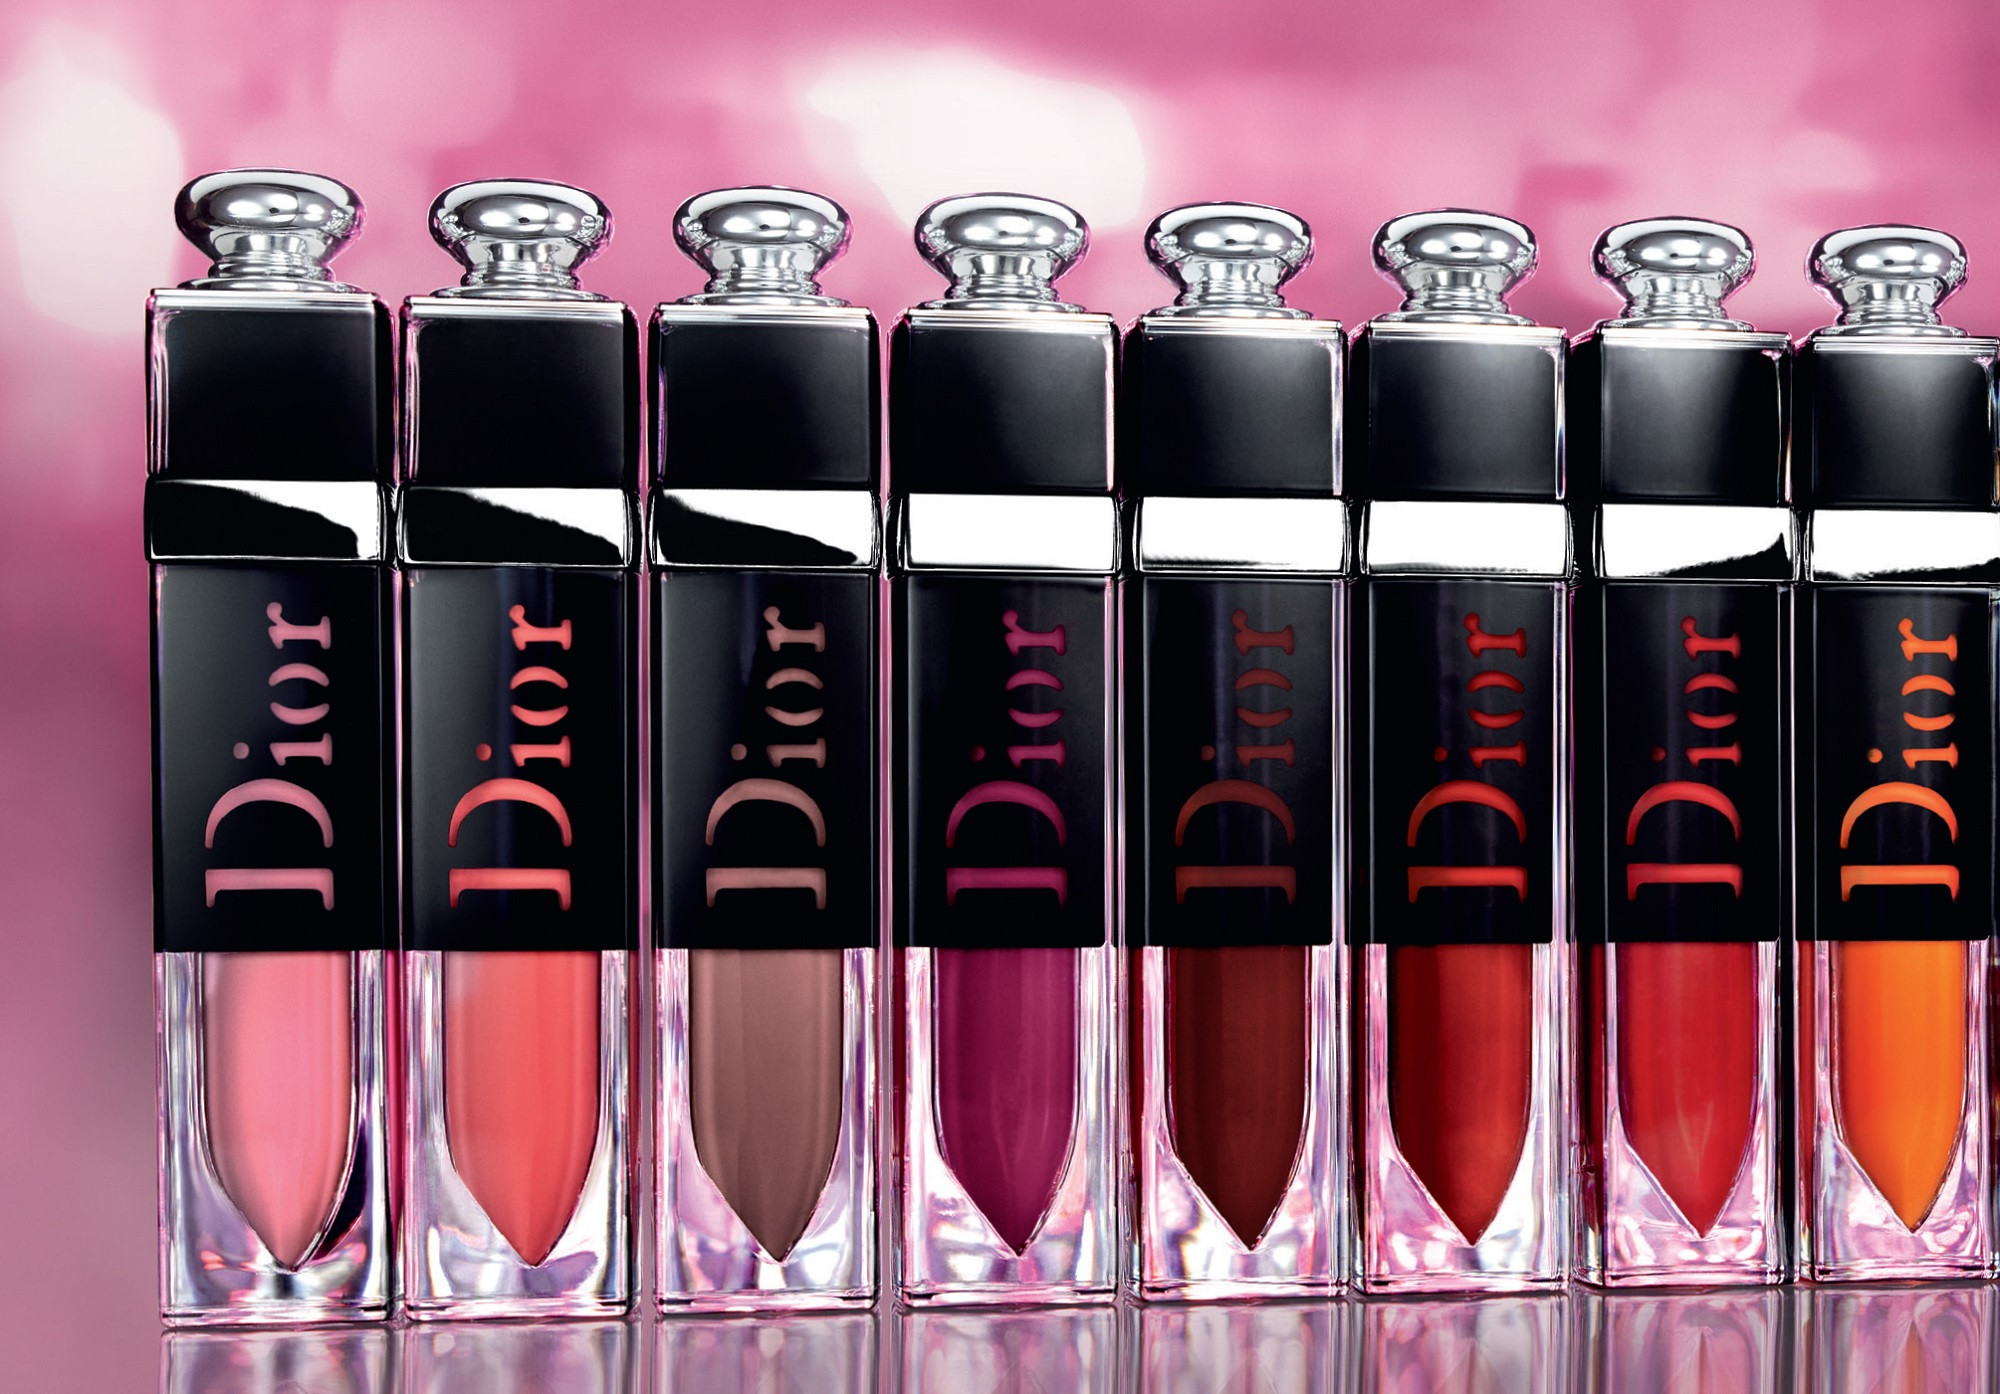 Dior Addict Lacquer Plump Lacquered Lip ink  Confusing lipstick named Dior  Addict Lacquer Plump in 426 LovelyD  Consumer reviews